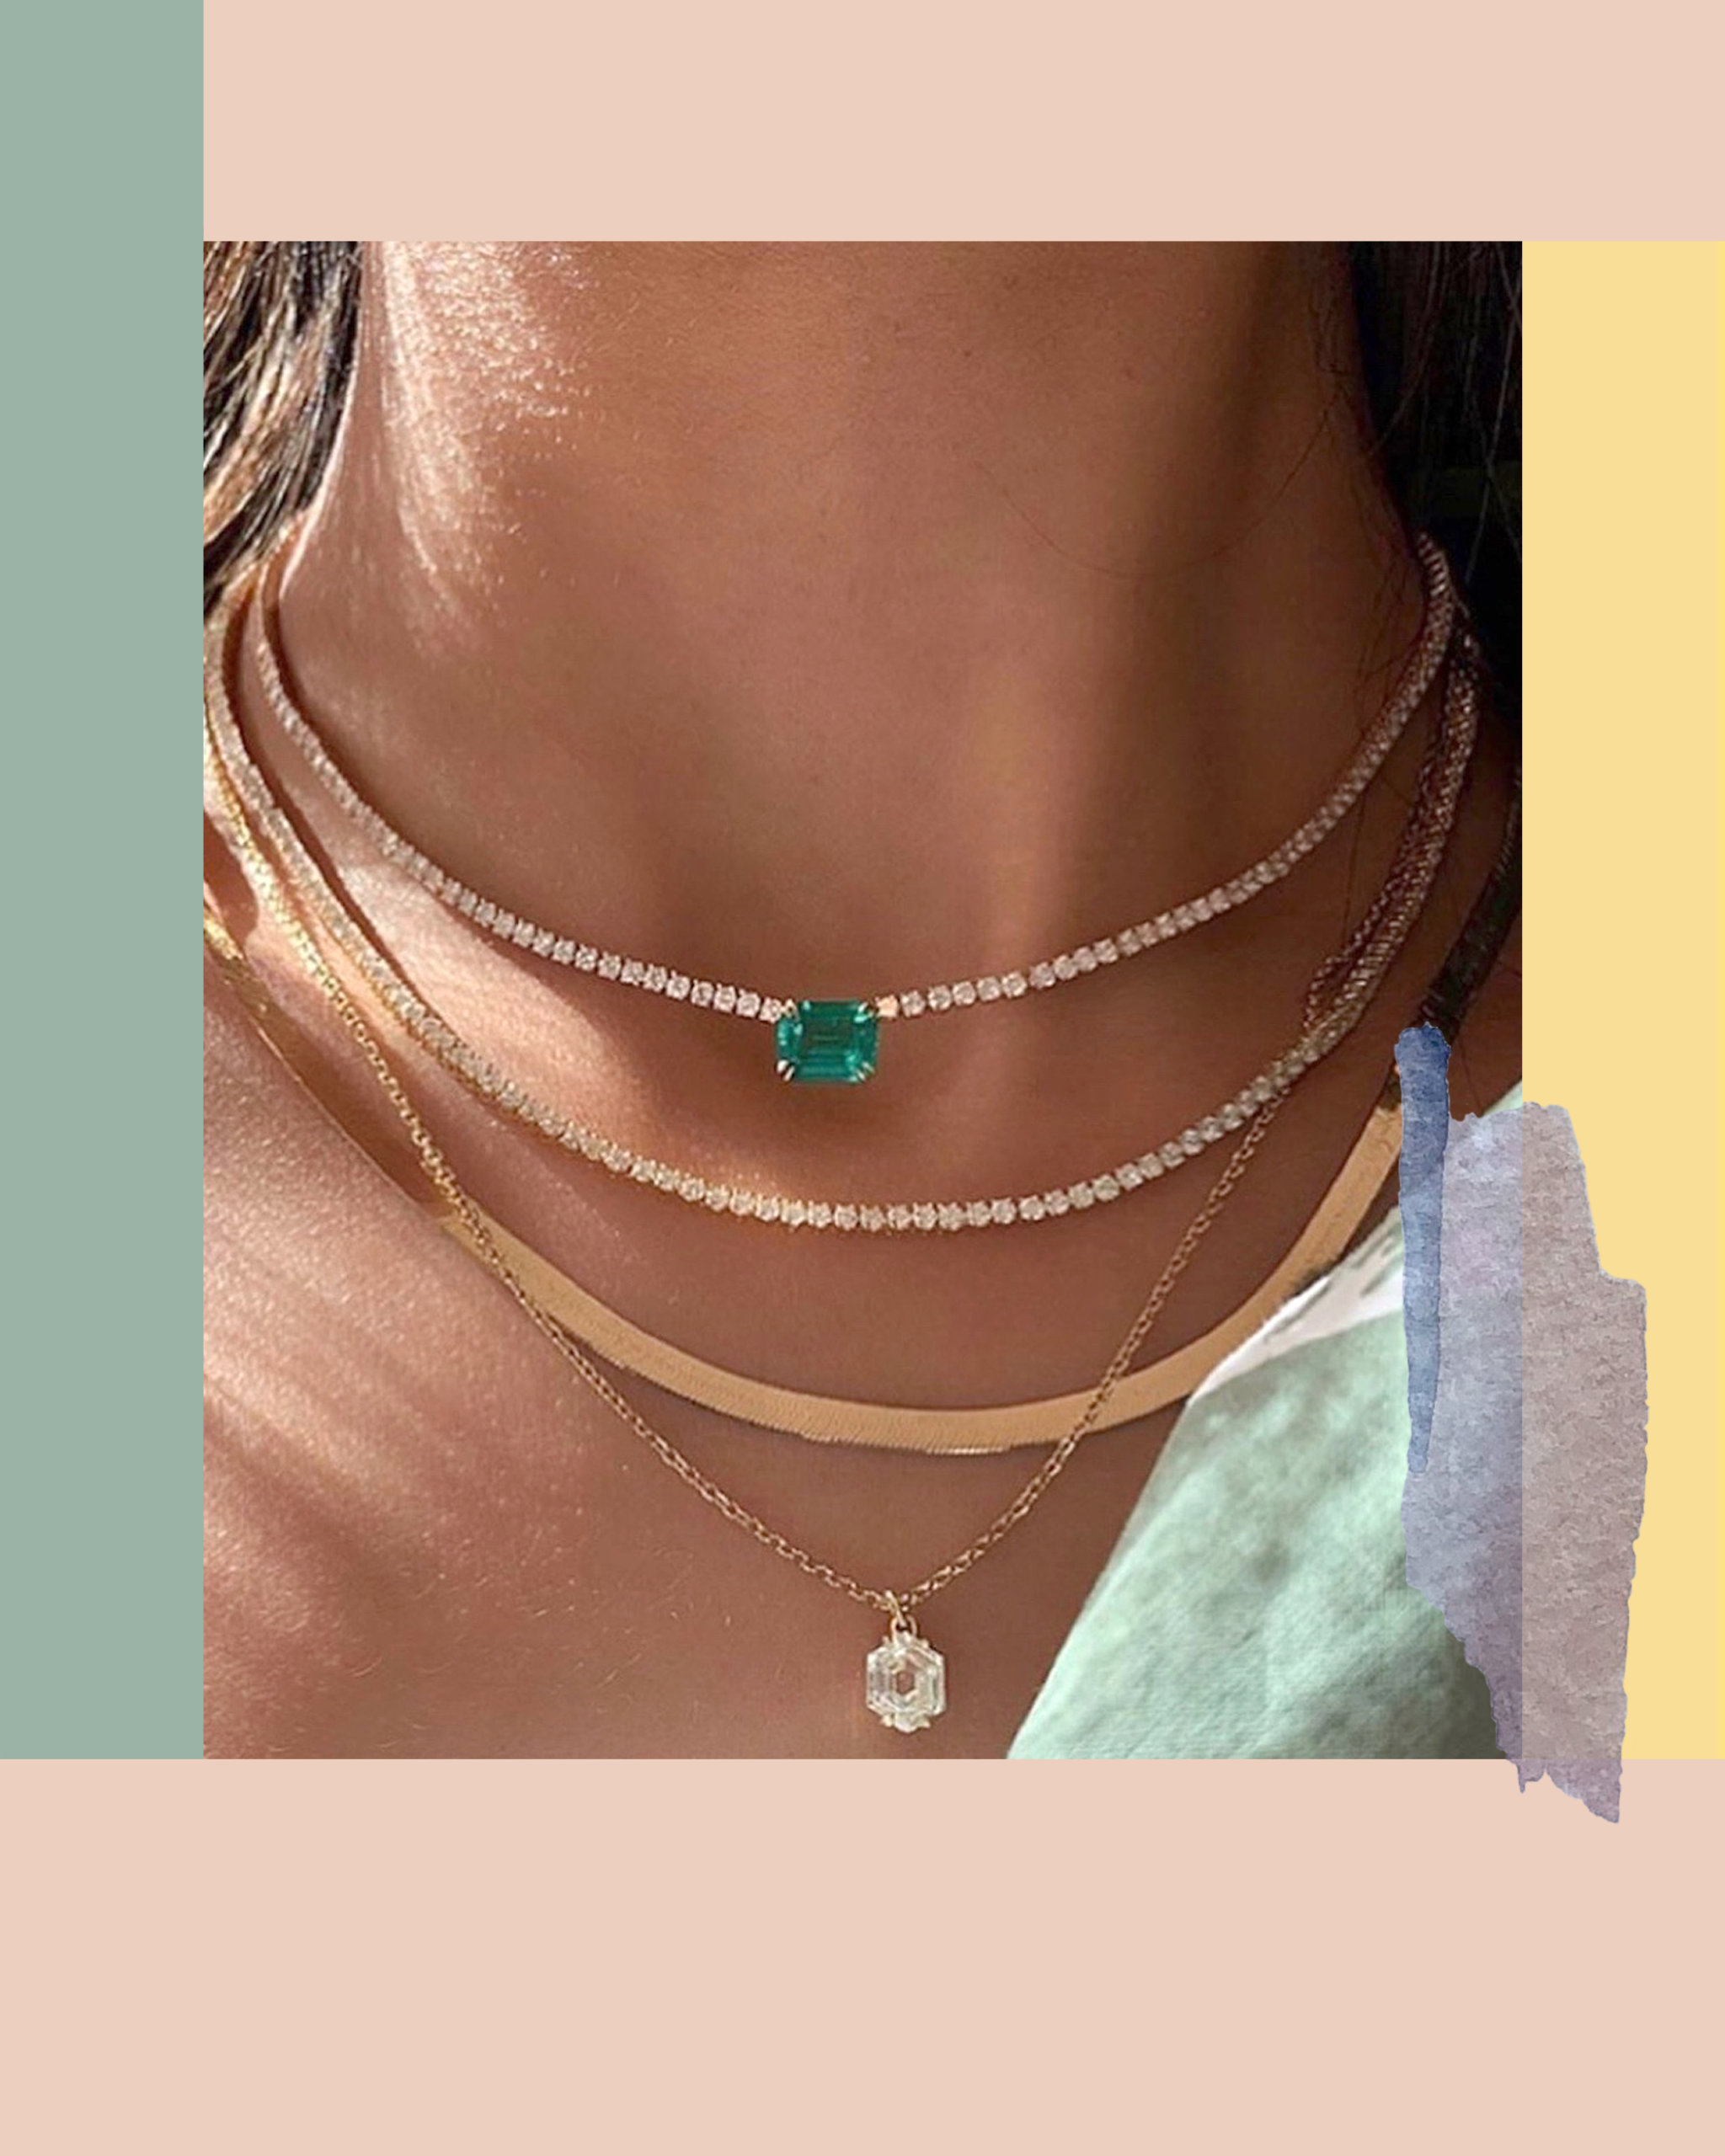 Emerald gemstone and pave diamonds set within gold layered necklaces from Anita Ko